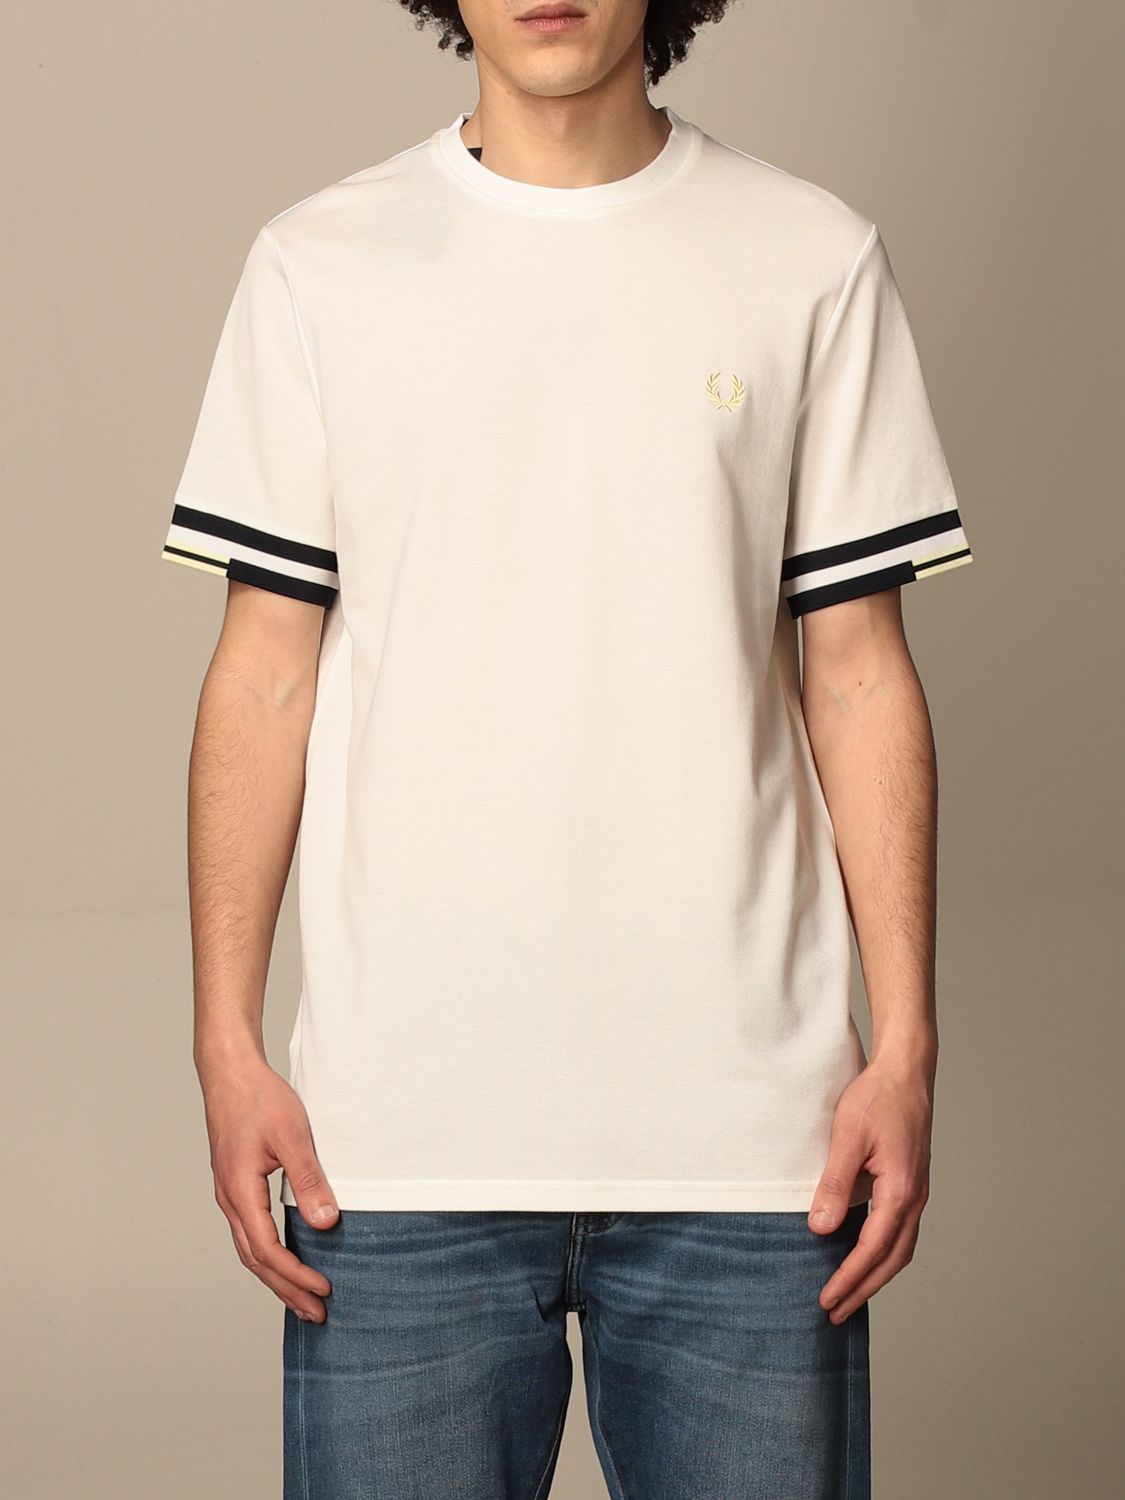 FRED PERRY: cotton t-shirt - White | Fred Perry t-shirt M1601 online on ...